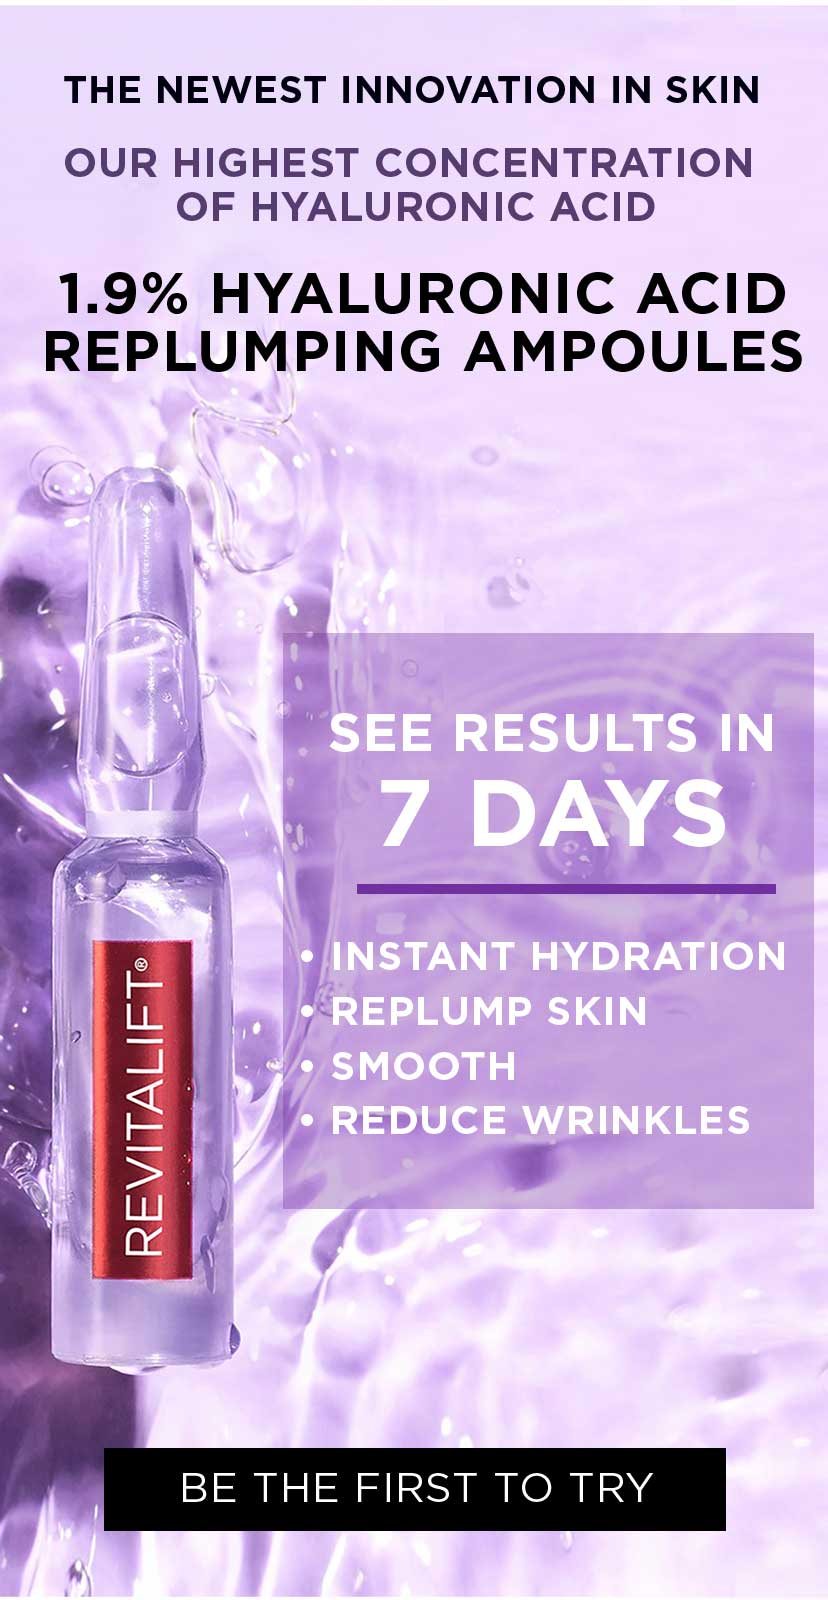 1.9 PERCENT HYALURONIC ACID REPLUMPING AMPOULES - BE THE FIRST TO TRY